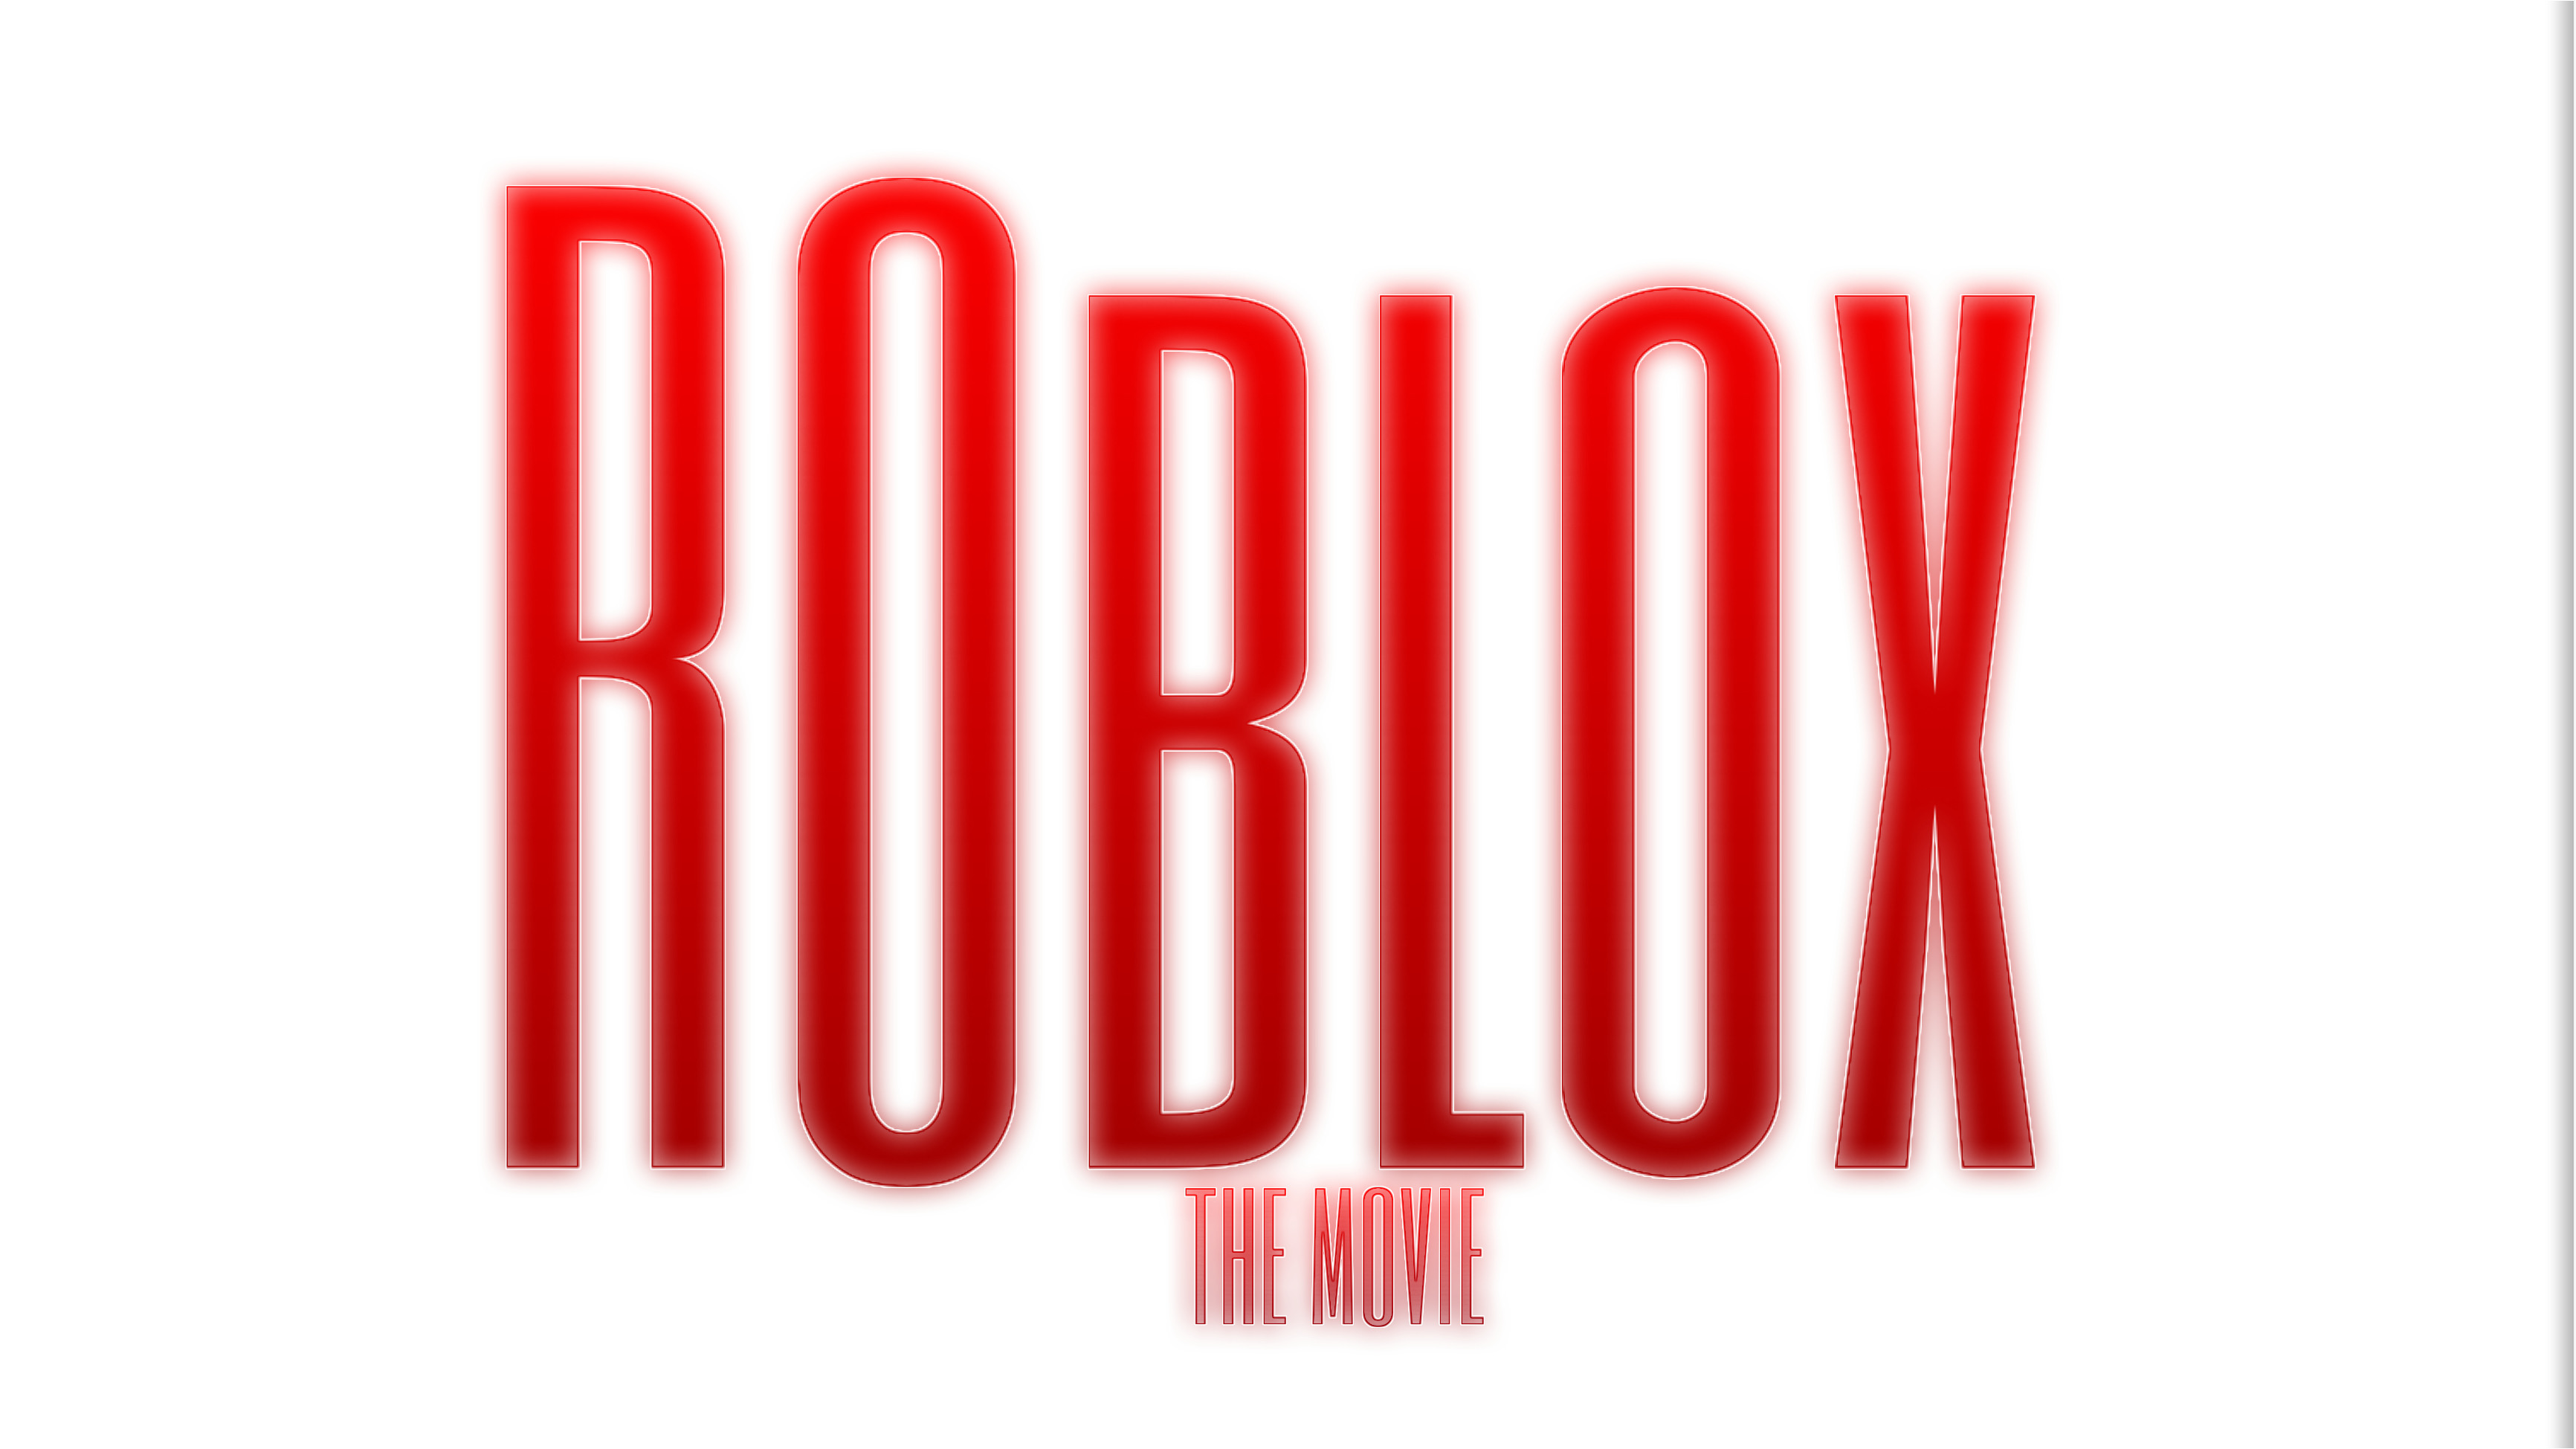 Roblox Is Here Roblox The Movie Image By Yuri Clark - roblox logo but in pink